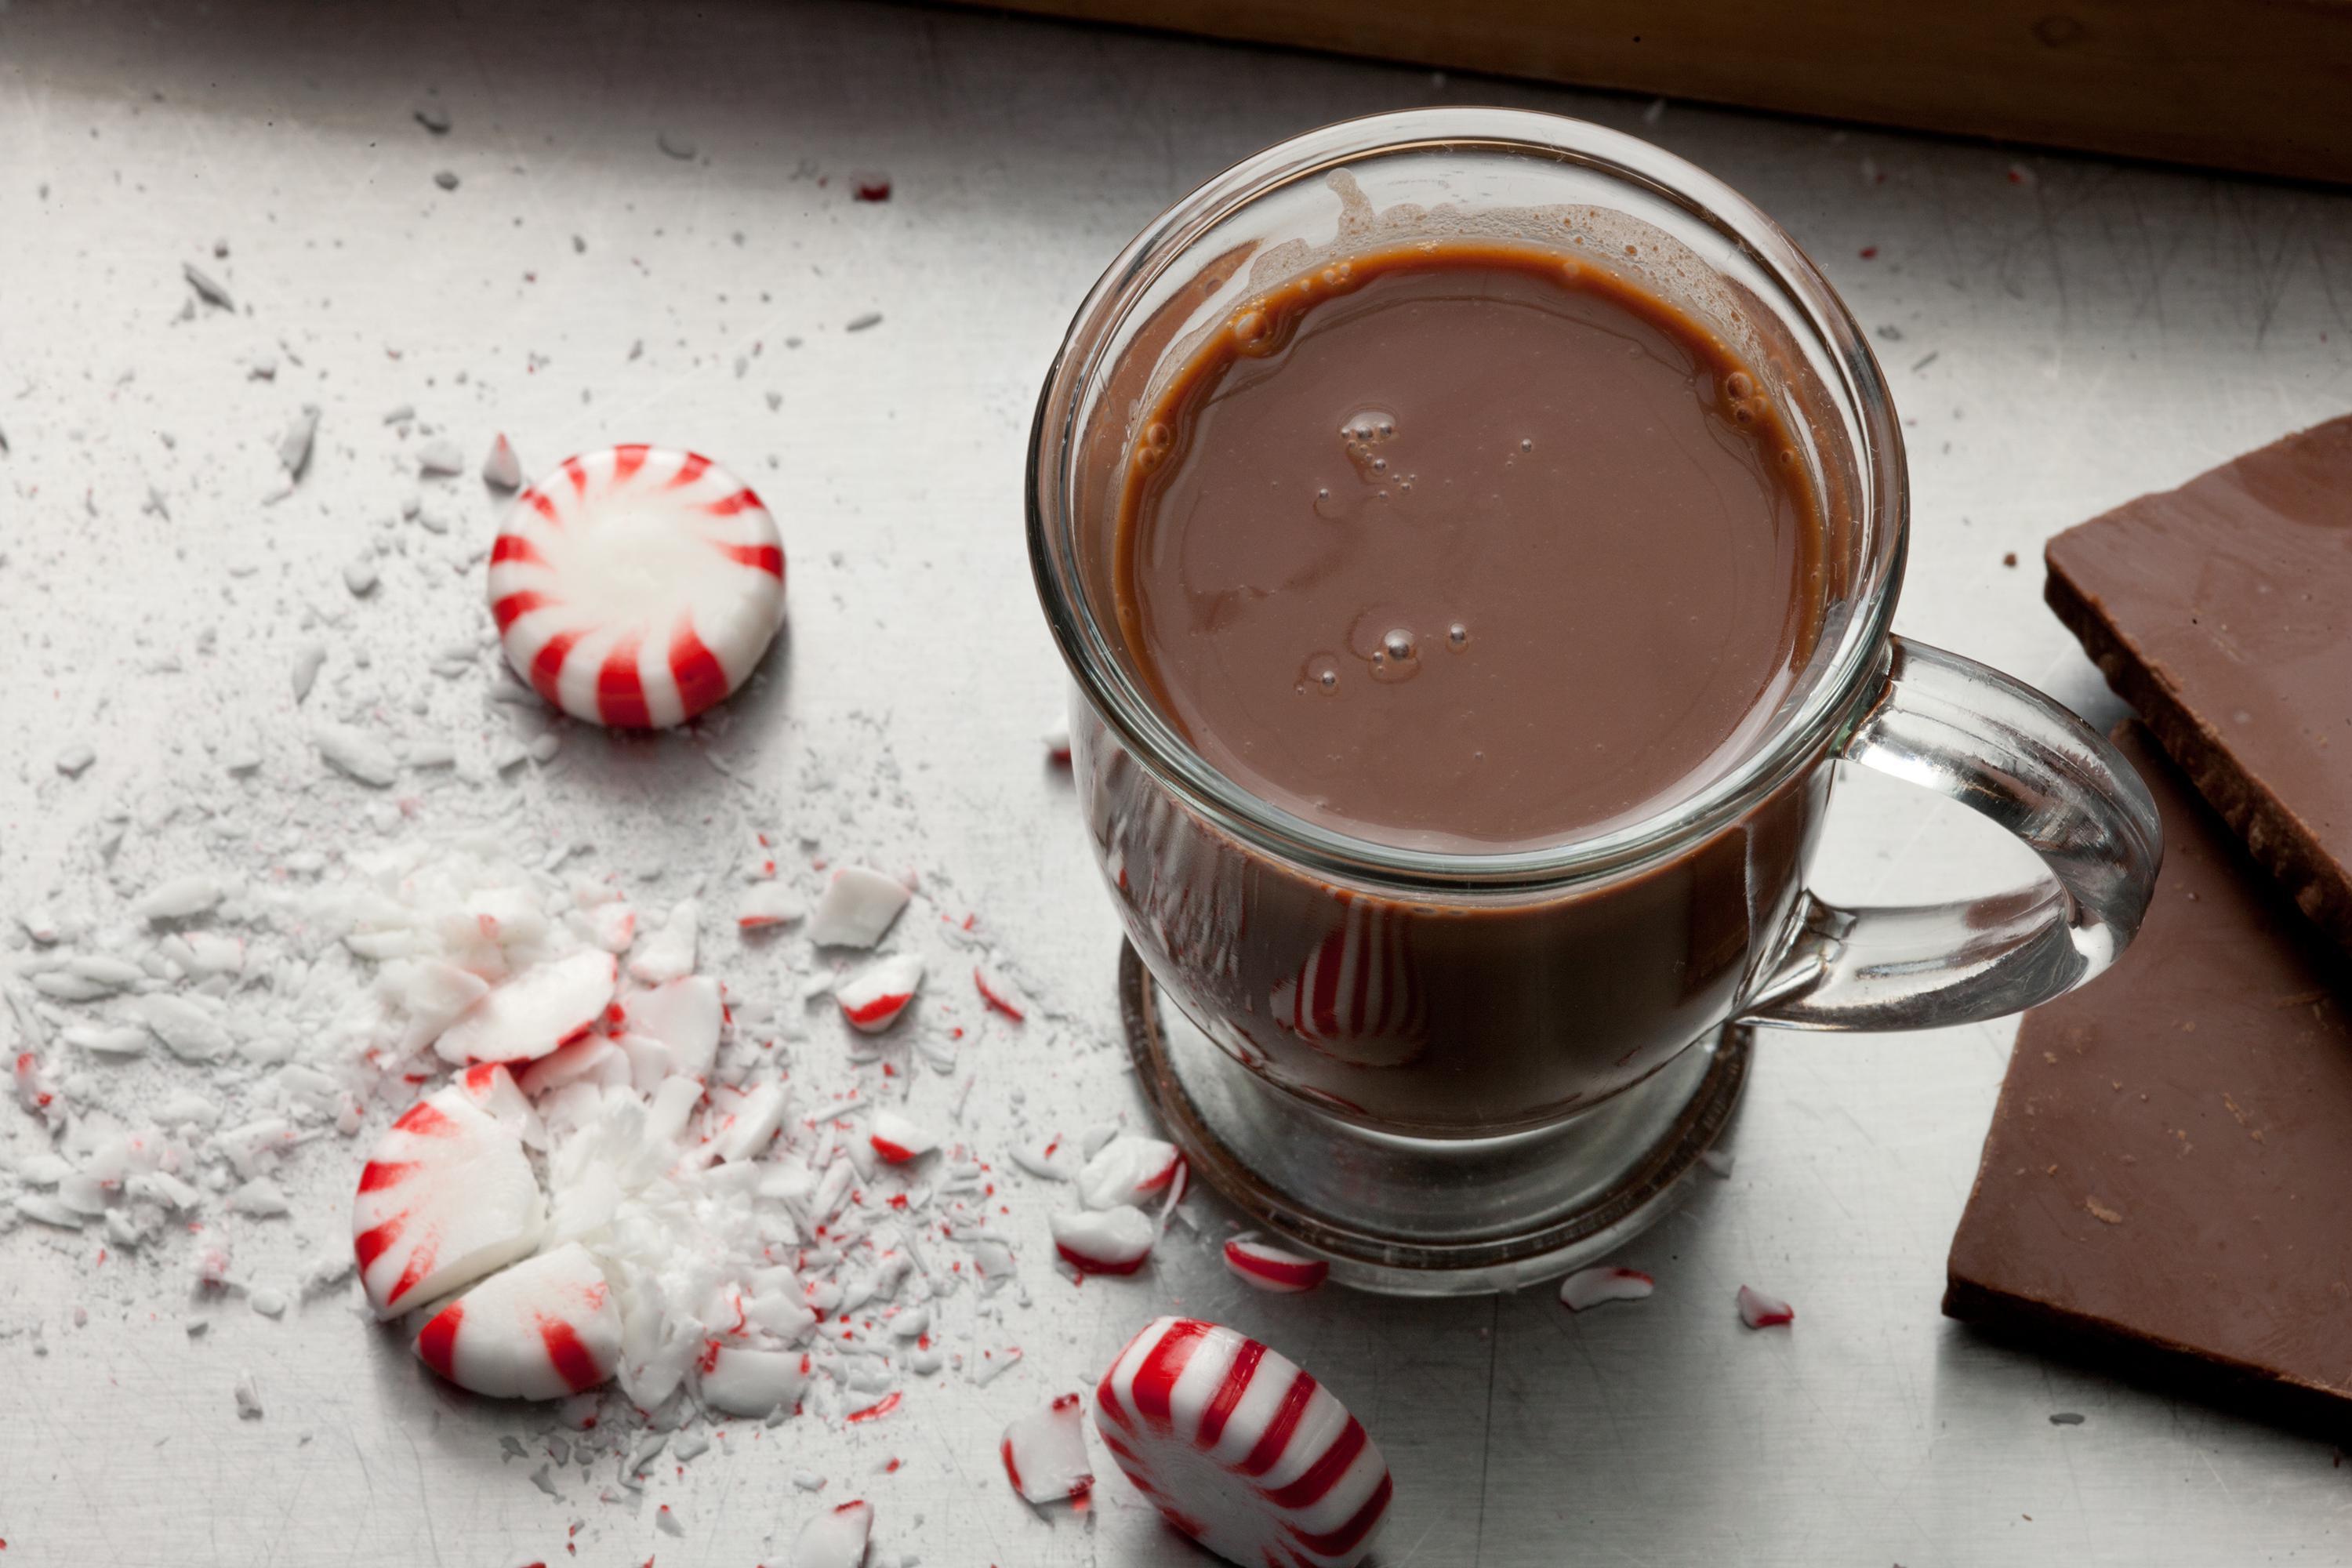 Peppermint is a tasty twist that is perfect for any season! Source:http://www.chow.com/recipes